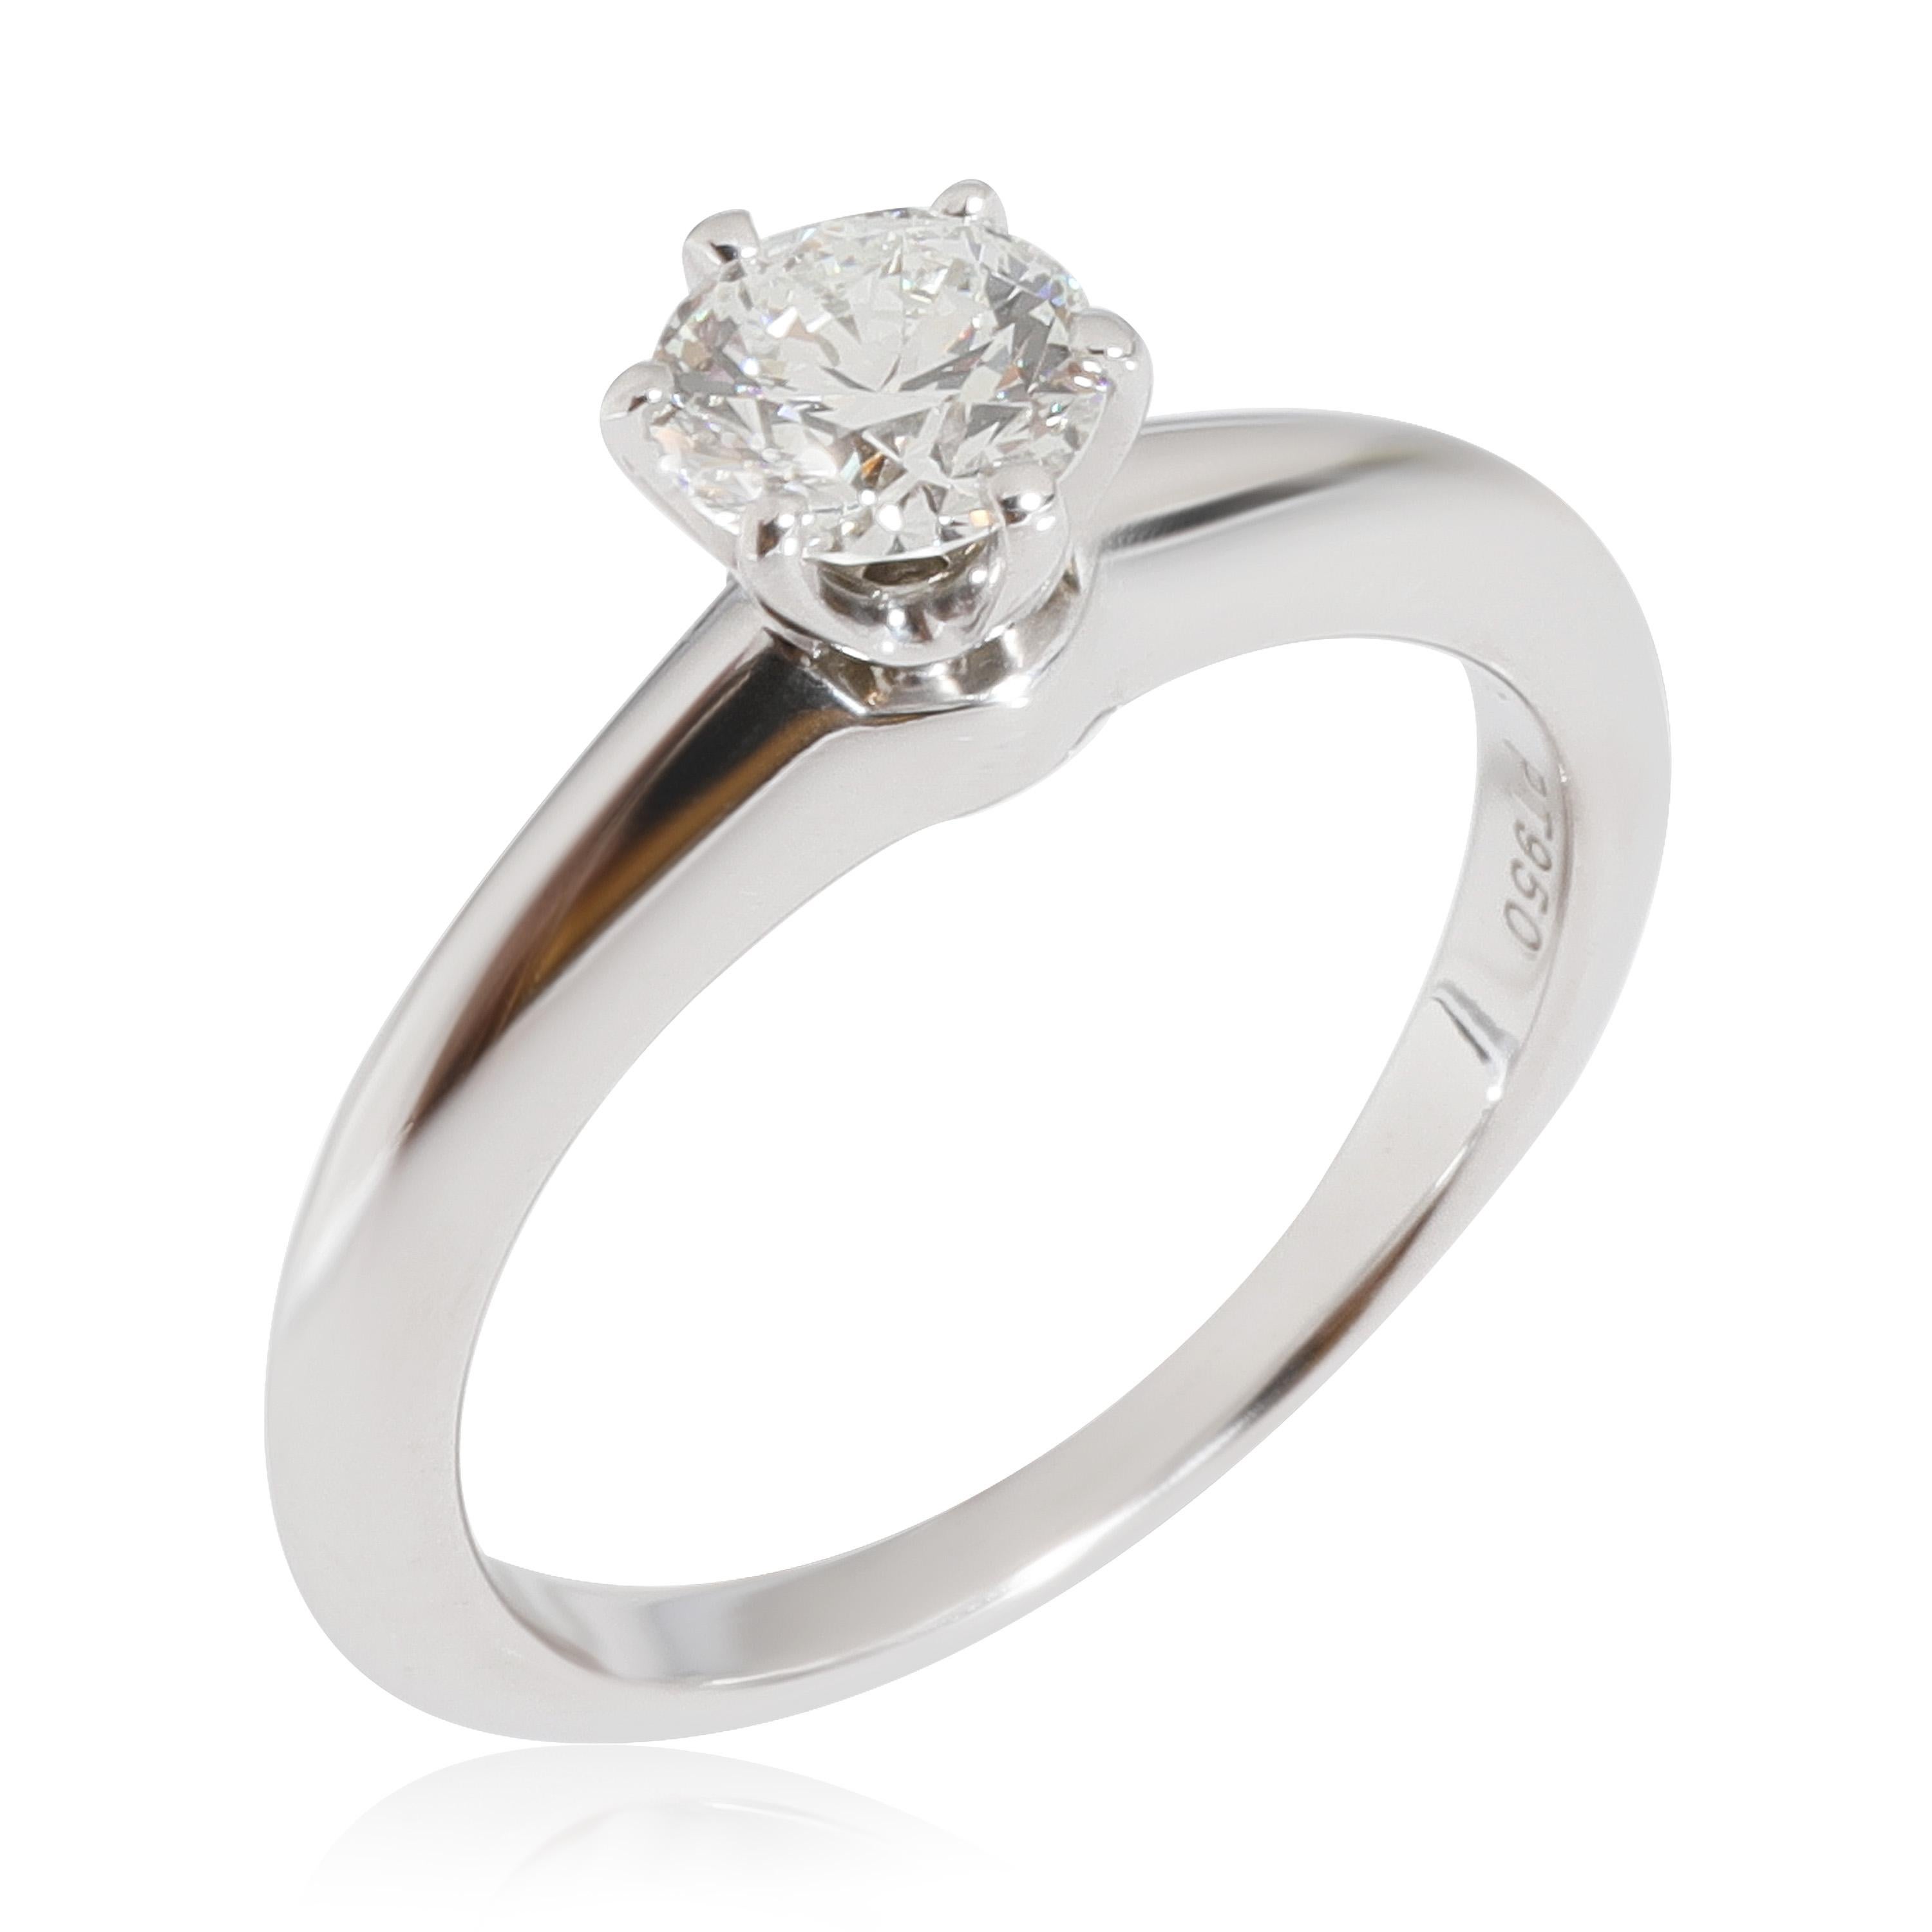 Tiffany & Co. Diamond Solitaire Engagement Ring in Platinum G VVS2 0.50 CT

PRIMARY DETAILS
SKU: 122960
Listing Title: Tiffany & Co. Diamond Solitaire Engagement Ring in Platinum G VVS2 0.50 CT
Condition Description: Retails for 5500 USD. In